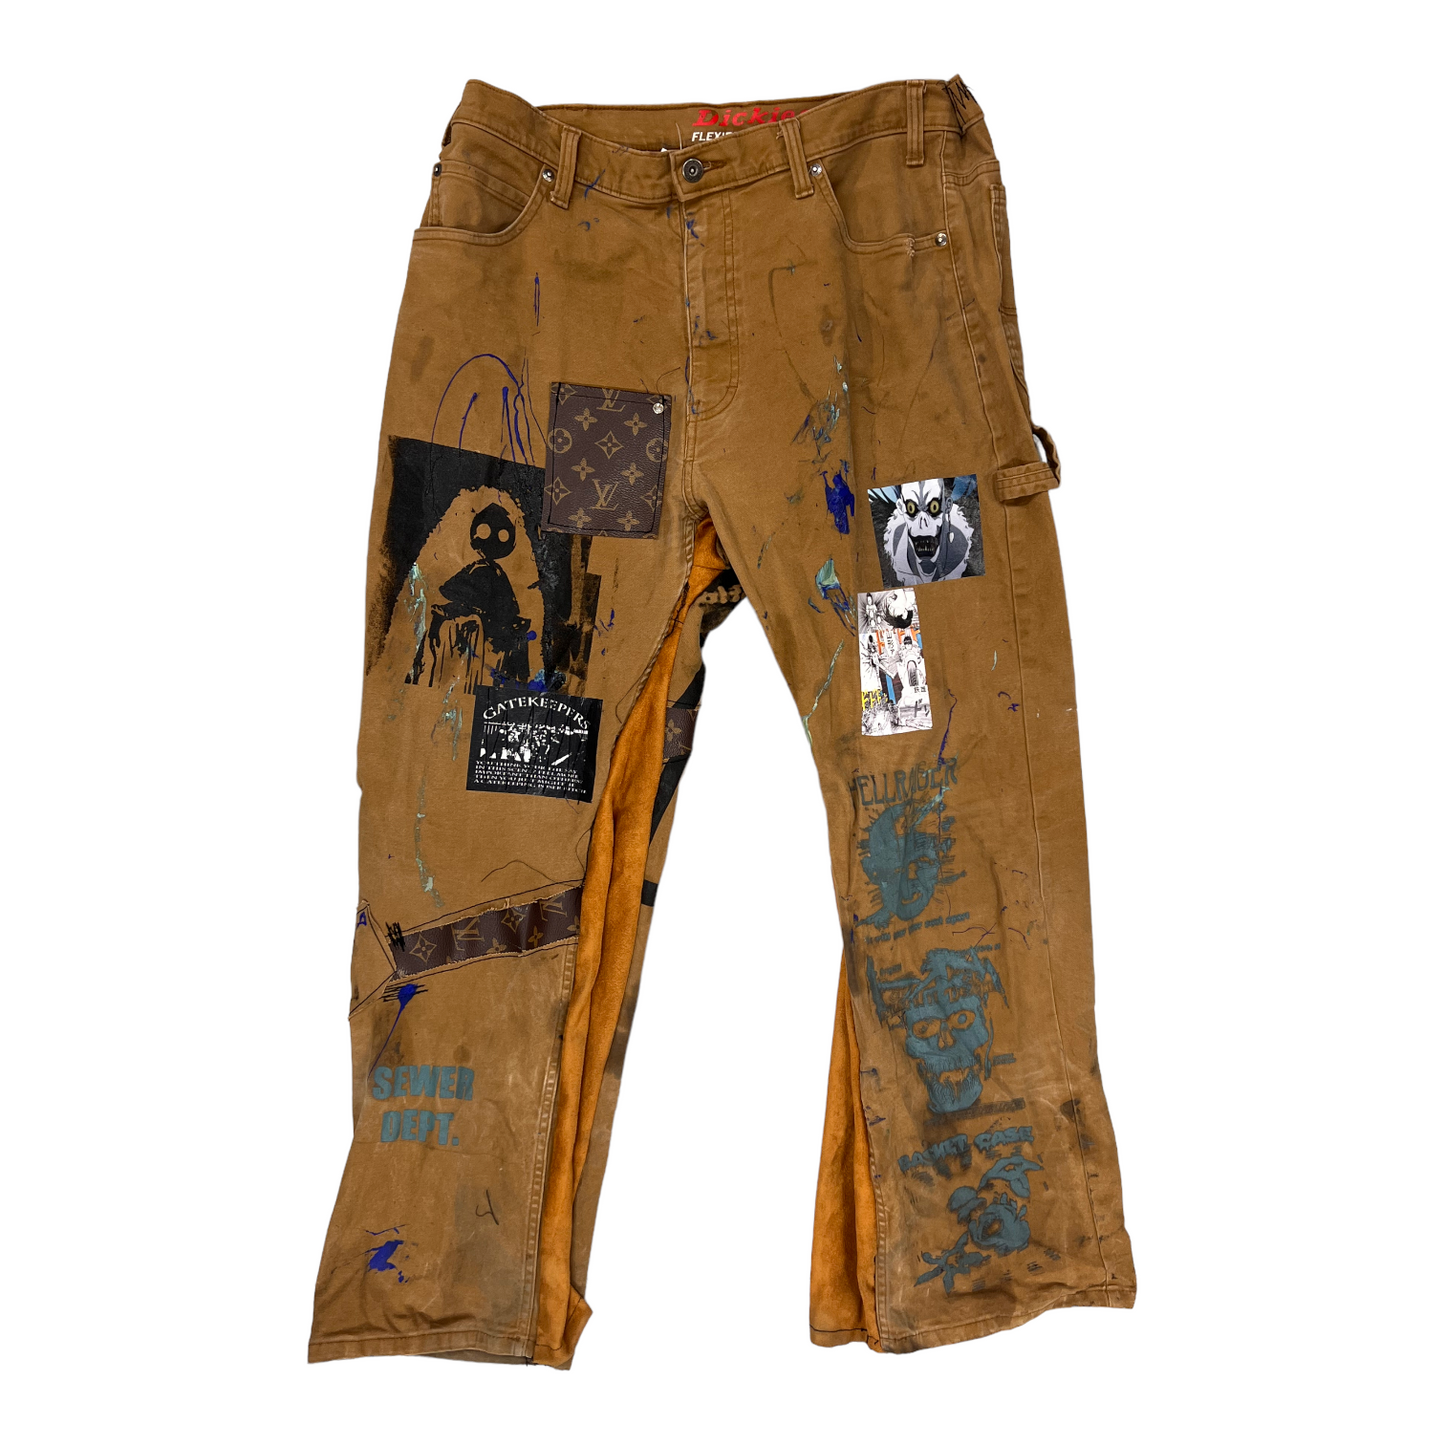 Sewer Dept. Patched and flared brown Dickies